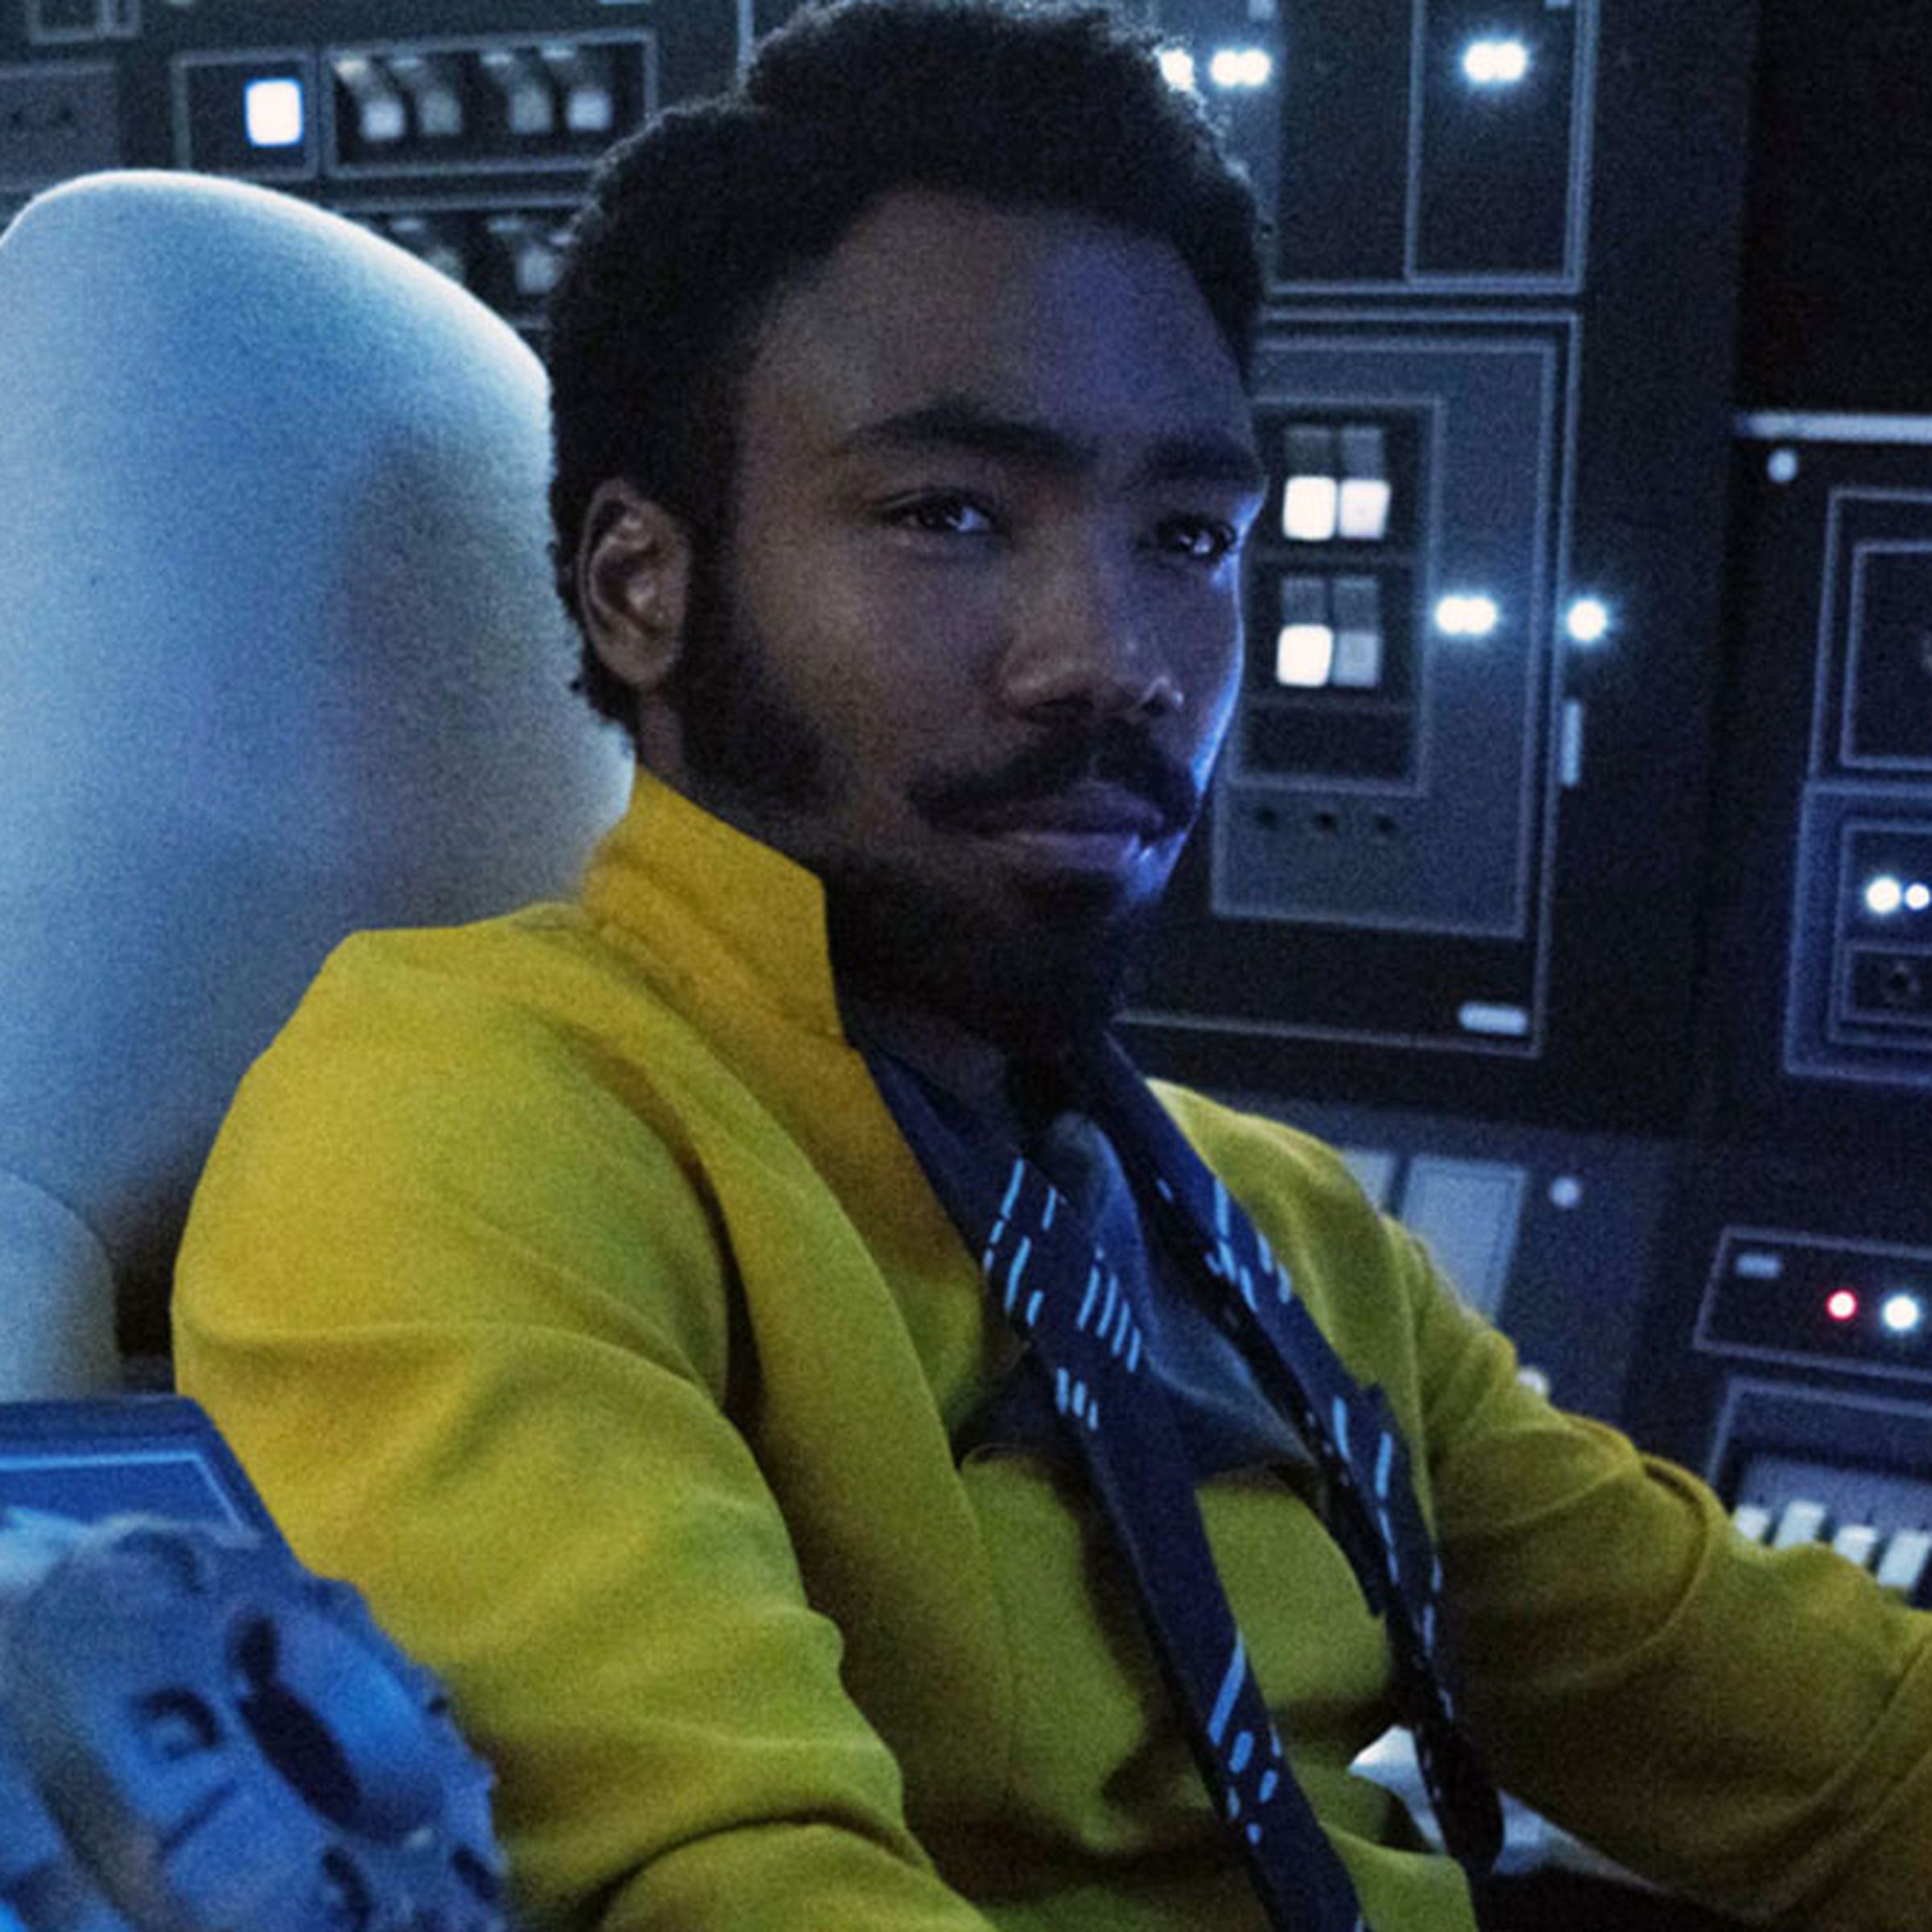 A stylish man in a yellow shirt sitting in the cockpit of a spaceship surrounded by an array of controls.